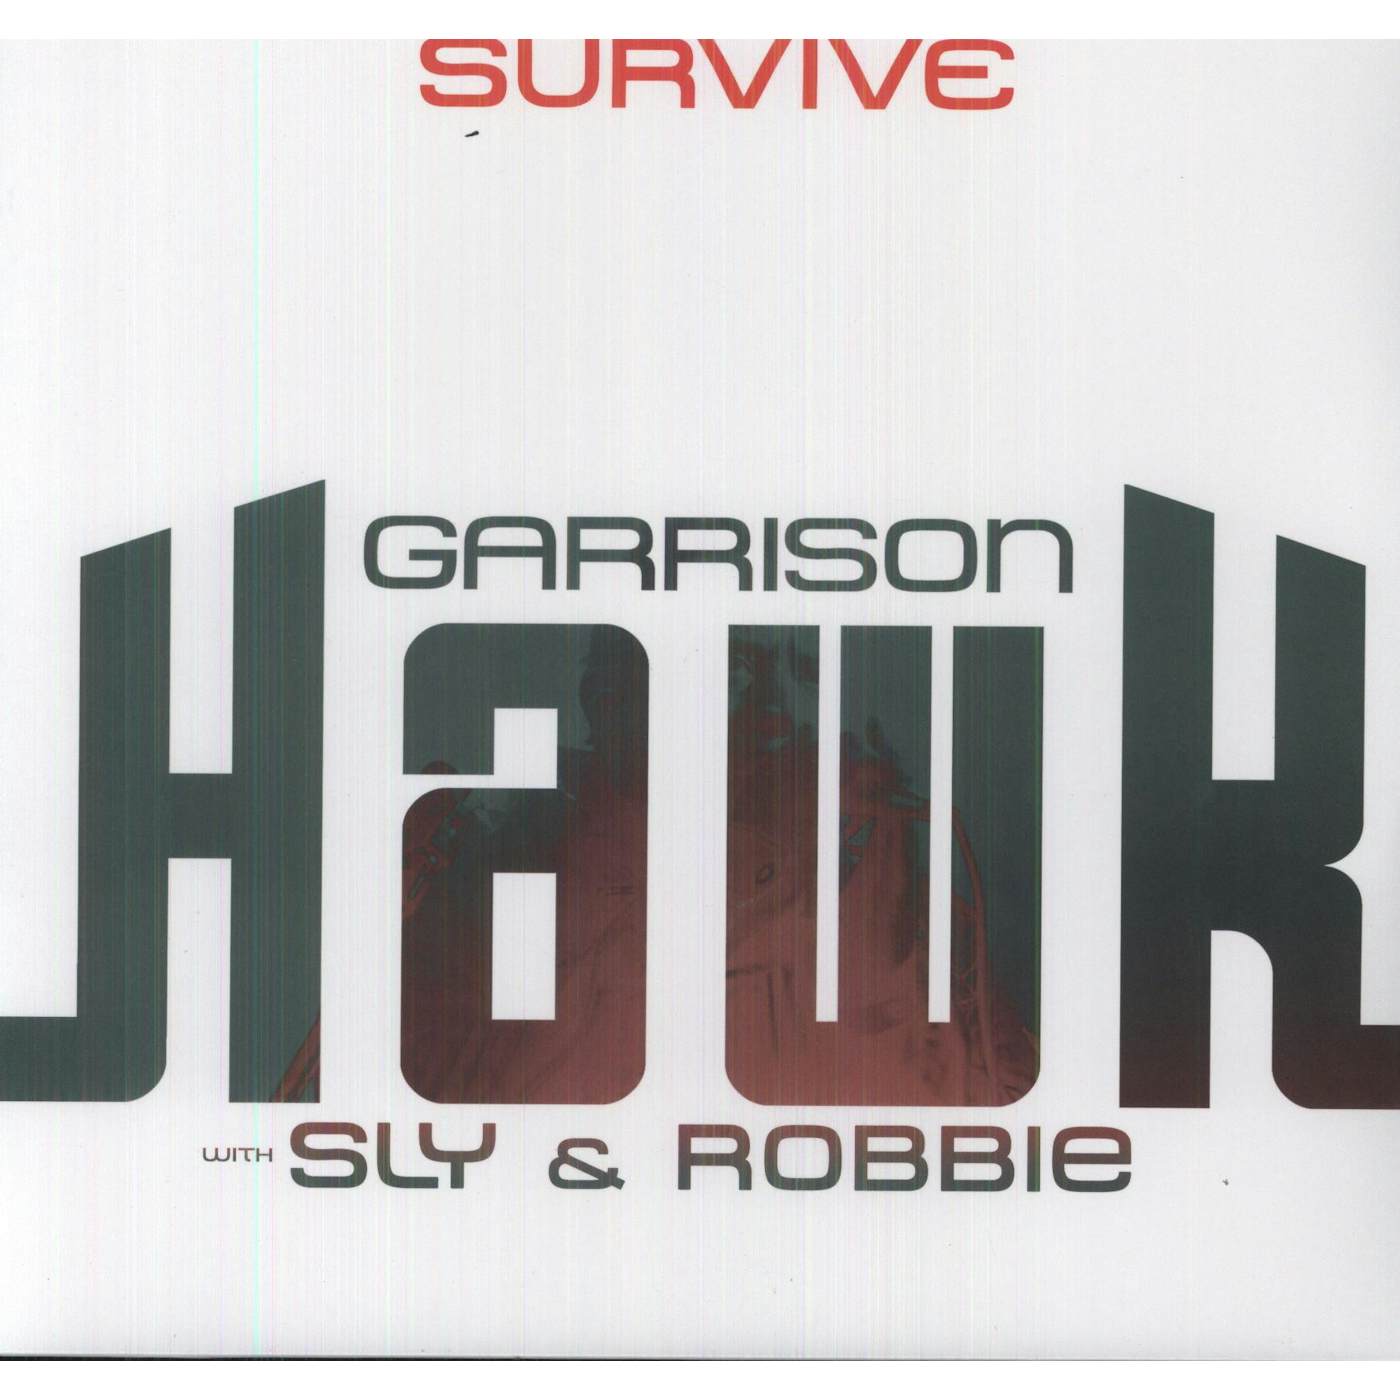 Garrison Hawk (with Sly and Robbie) Survive Vinyl Record